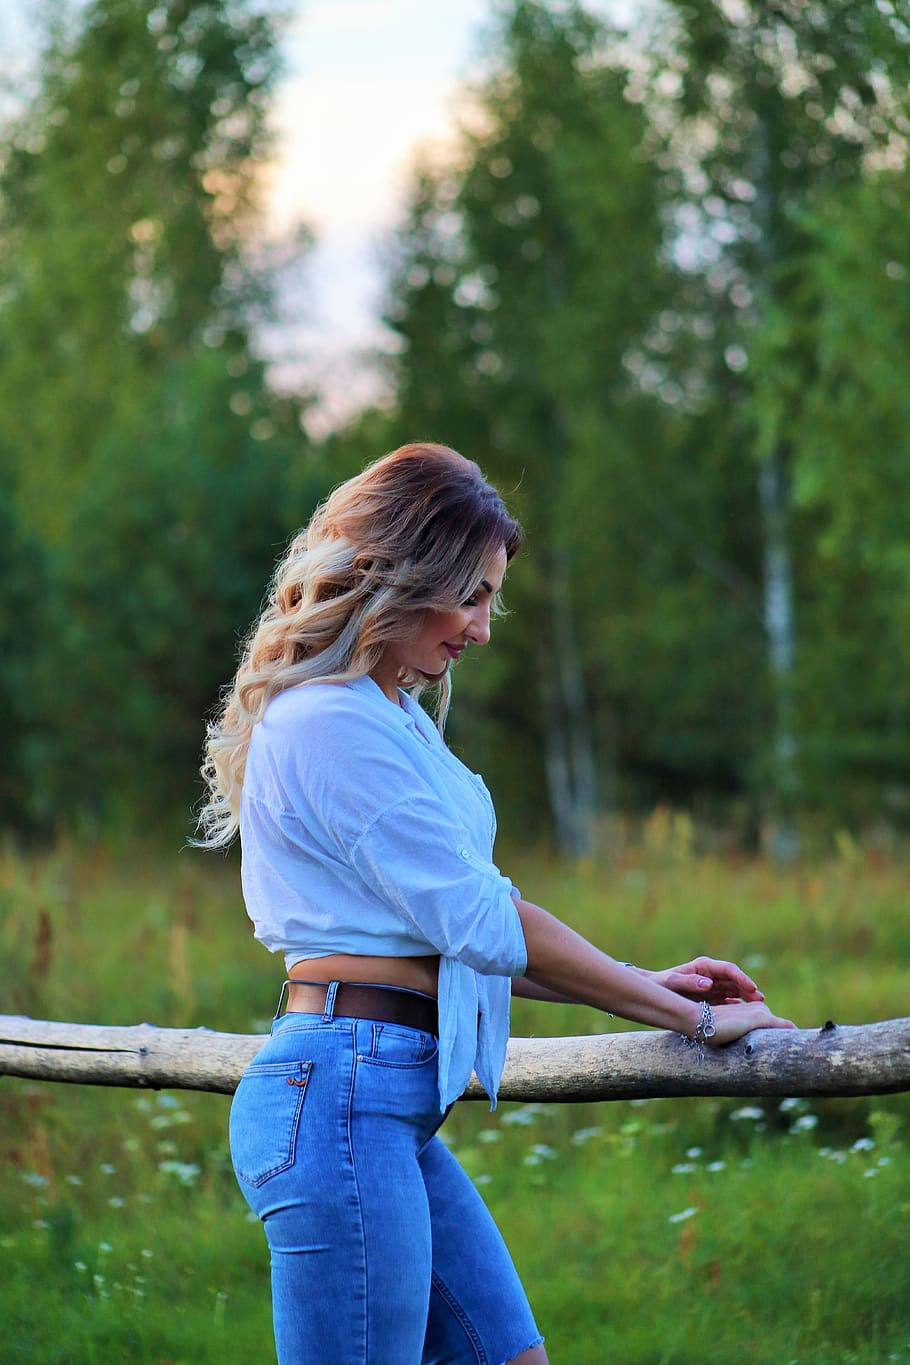 beauty, village, field, russia, nature, landscape, tourism, jeans, travel, hairstyle